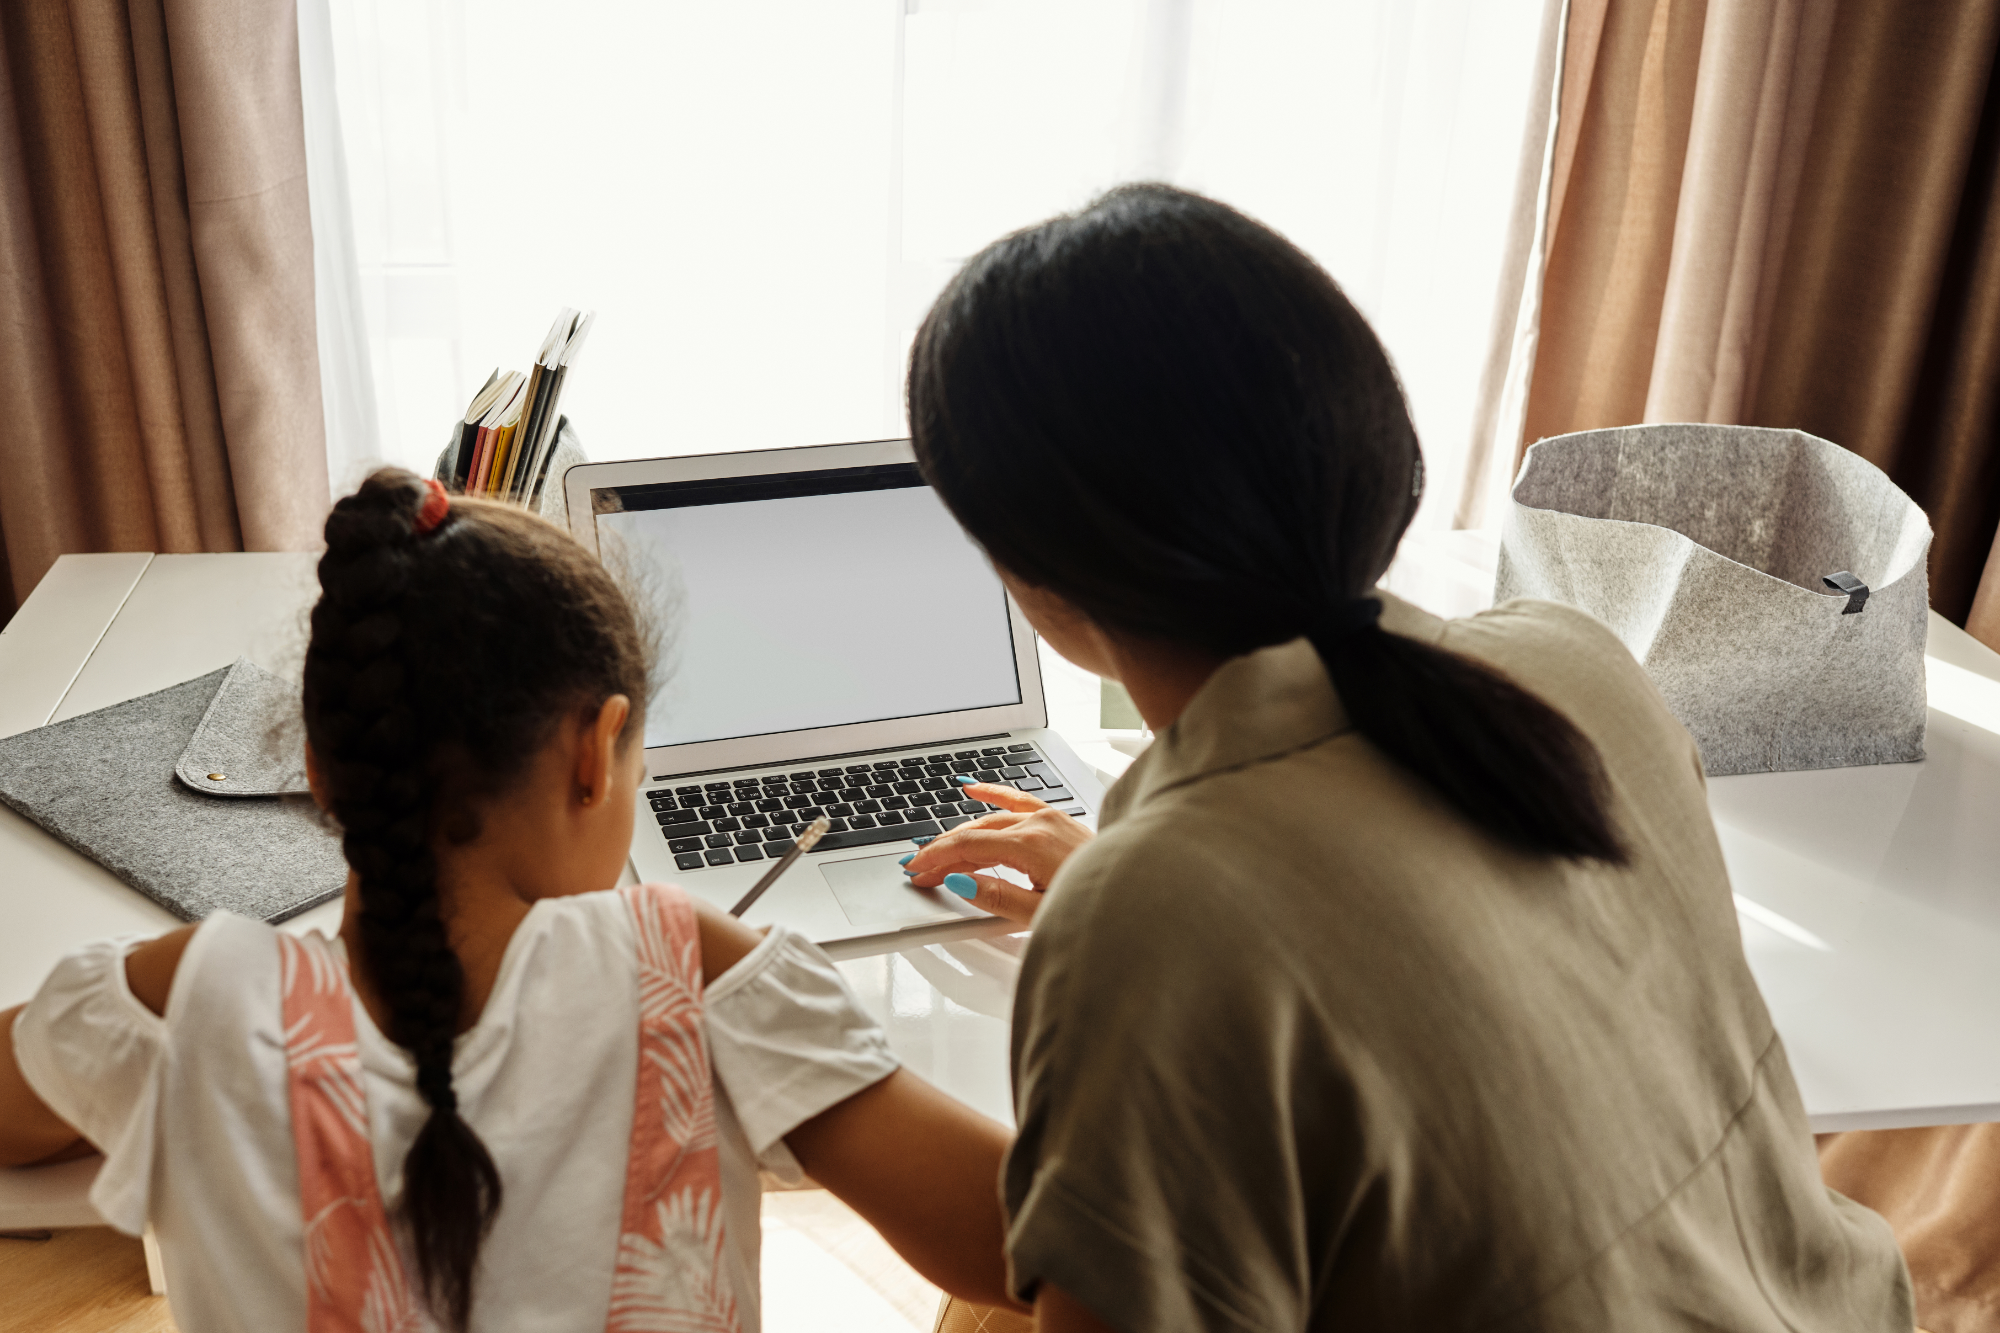 5 Tips to Handle School-From-Home this Spring